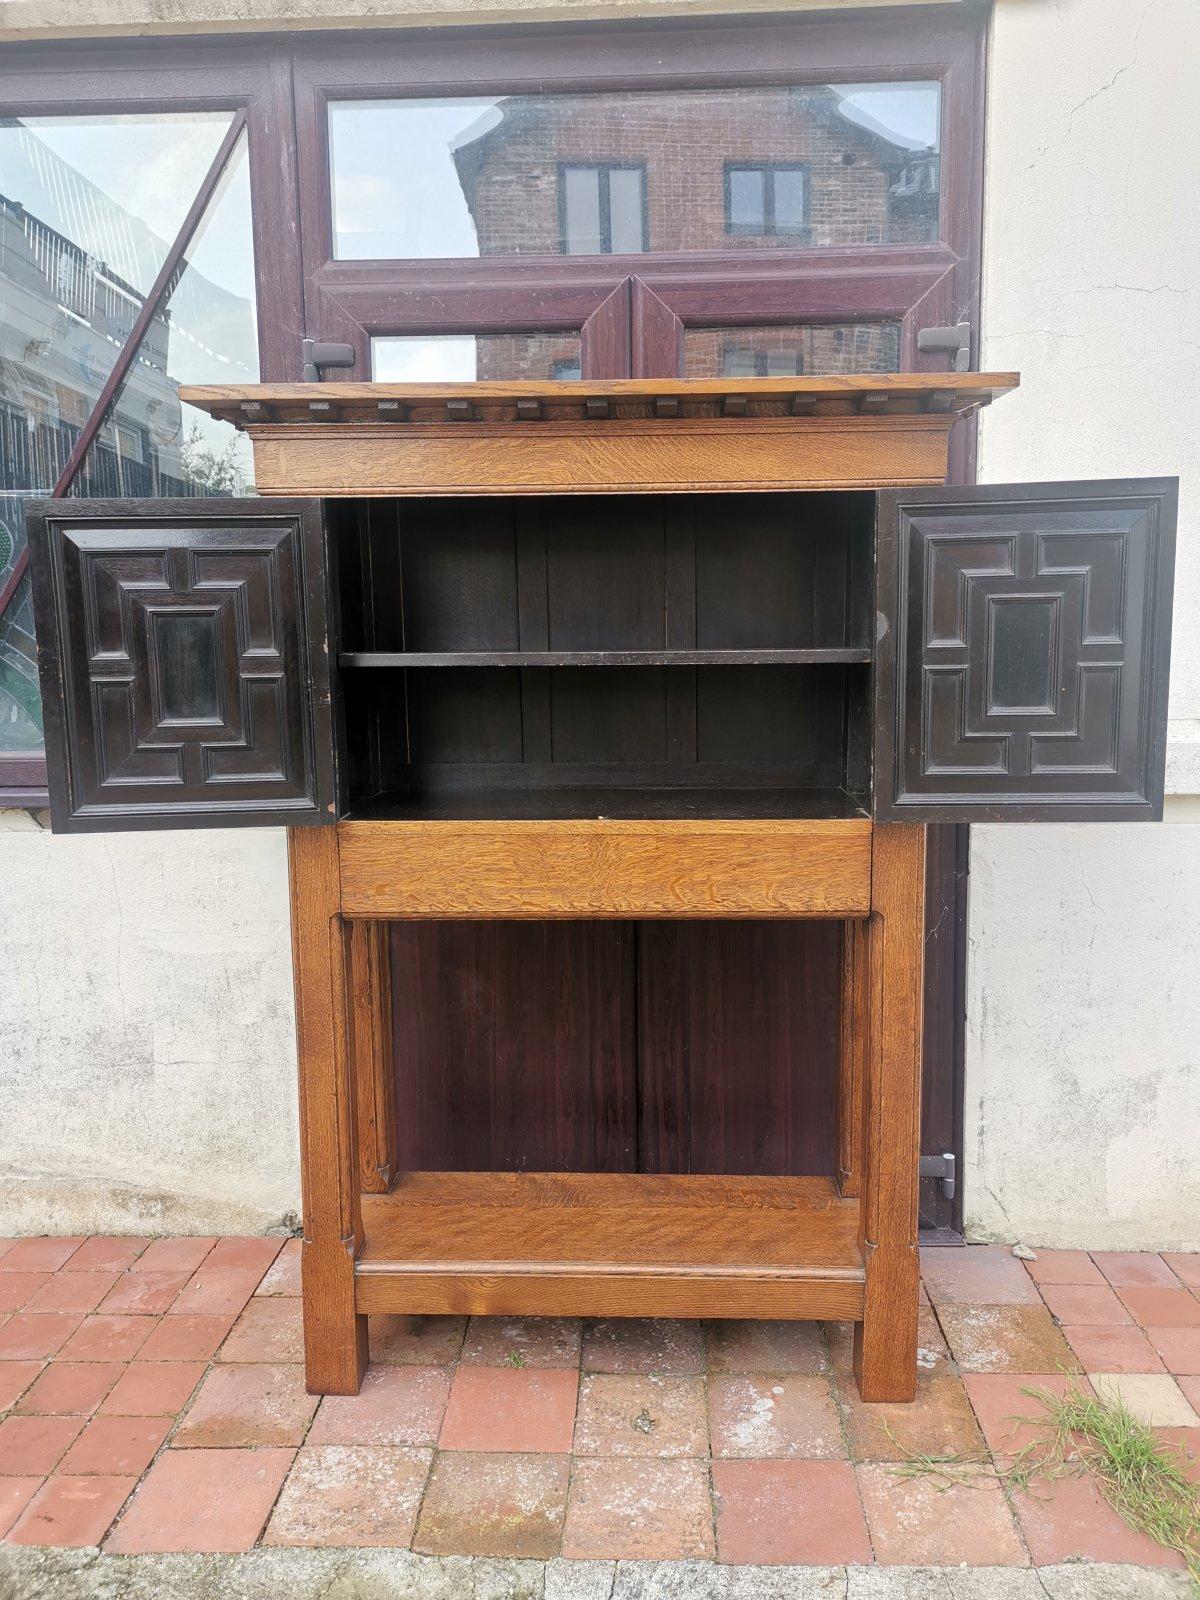 Liberty & Co . Attributed.
A super quality crafts man-made English Arts and Crafts style oak court cupboard with a flat top making a useful display area, a projecting cornice with an array of shaped supports, a central pair of panelled doors made